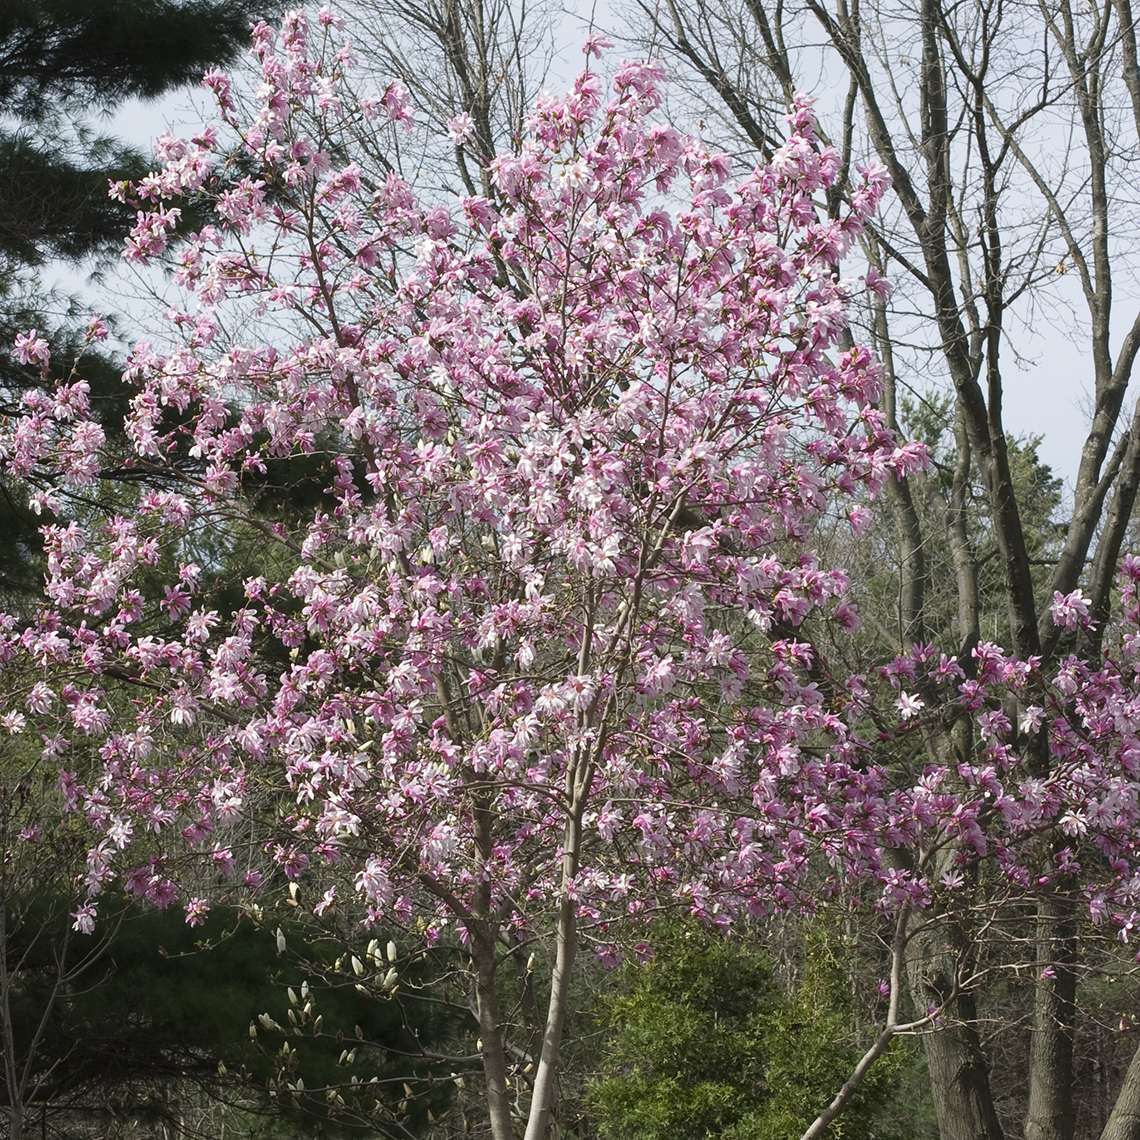 Merrill Magnolia blooming heavily in the landscape